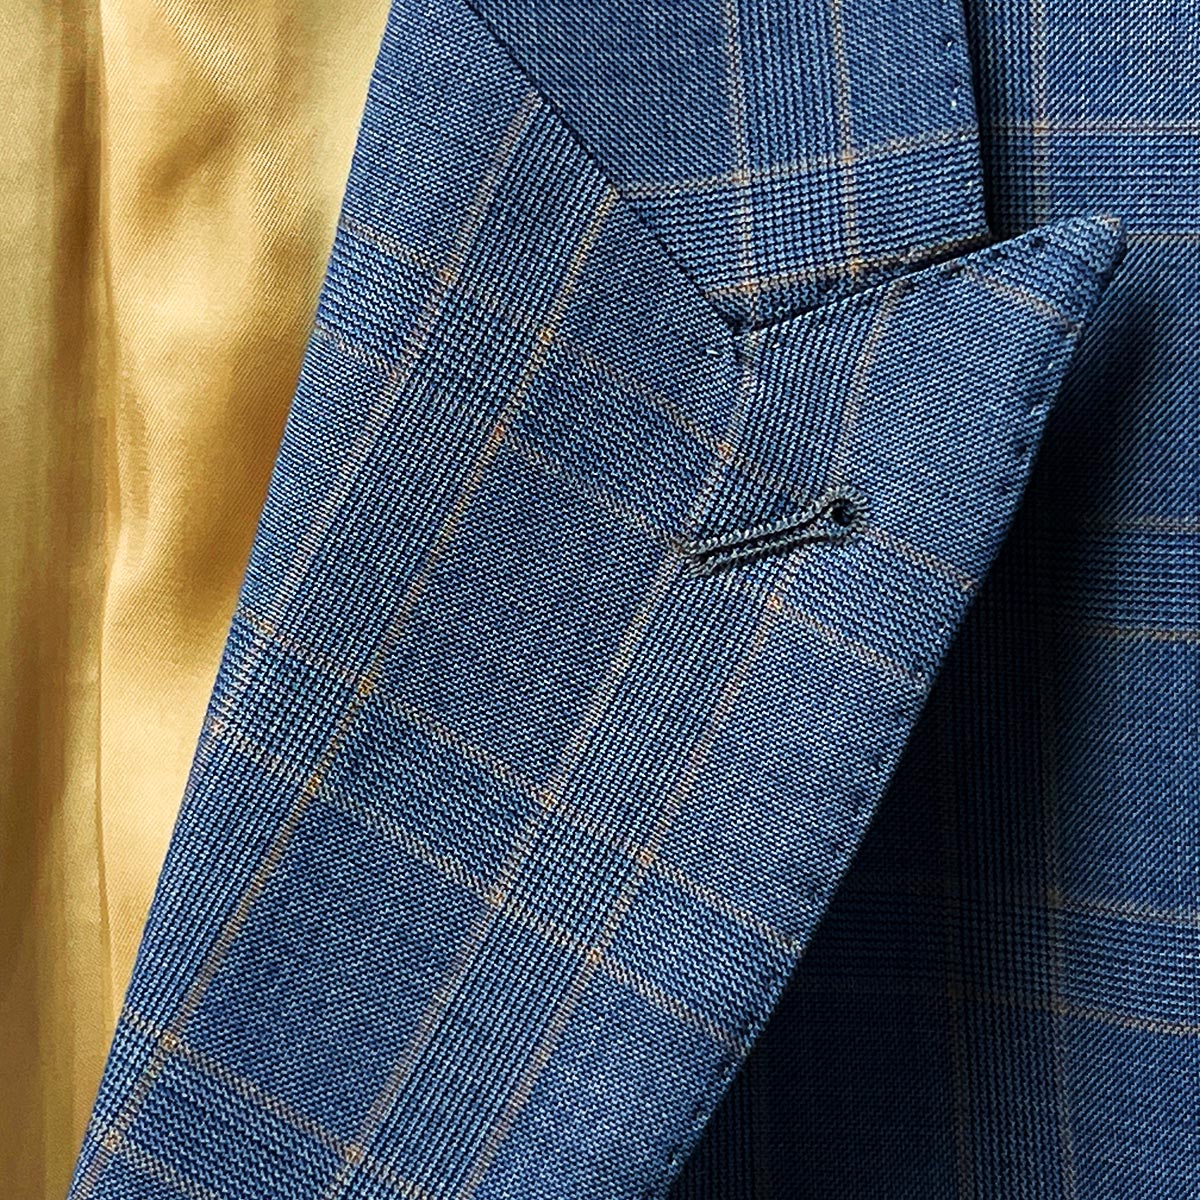 Bemberg lining provides breathability and comfort in this stone blue suit.